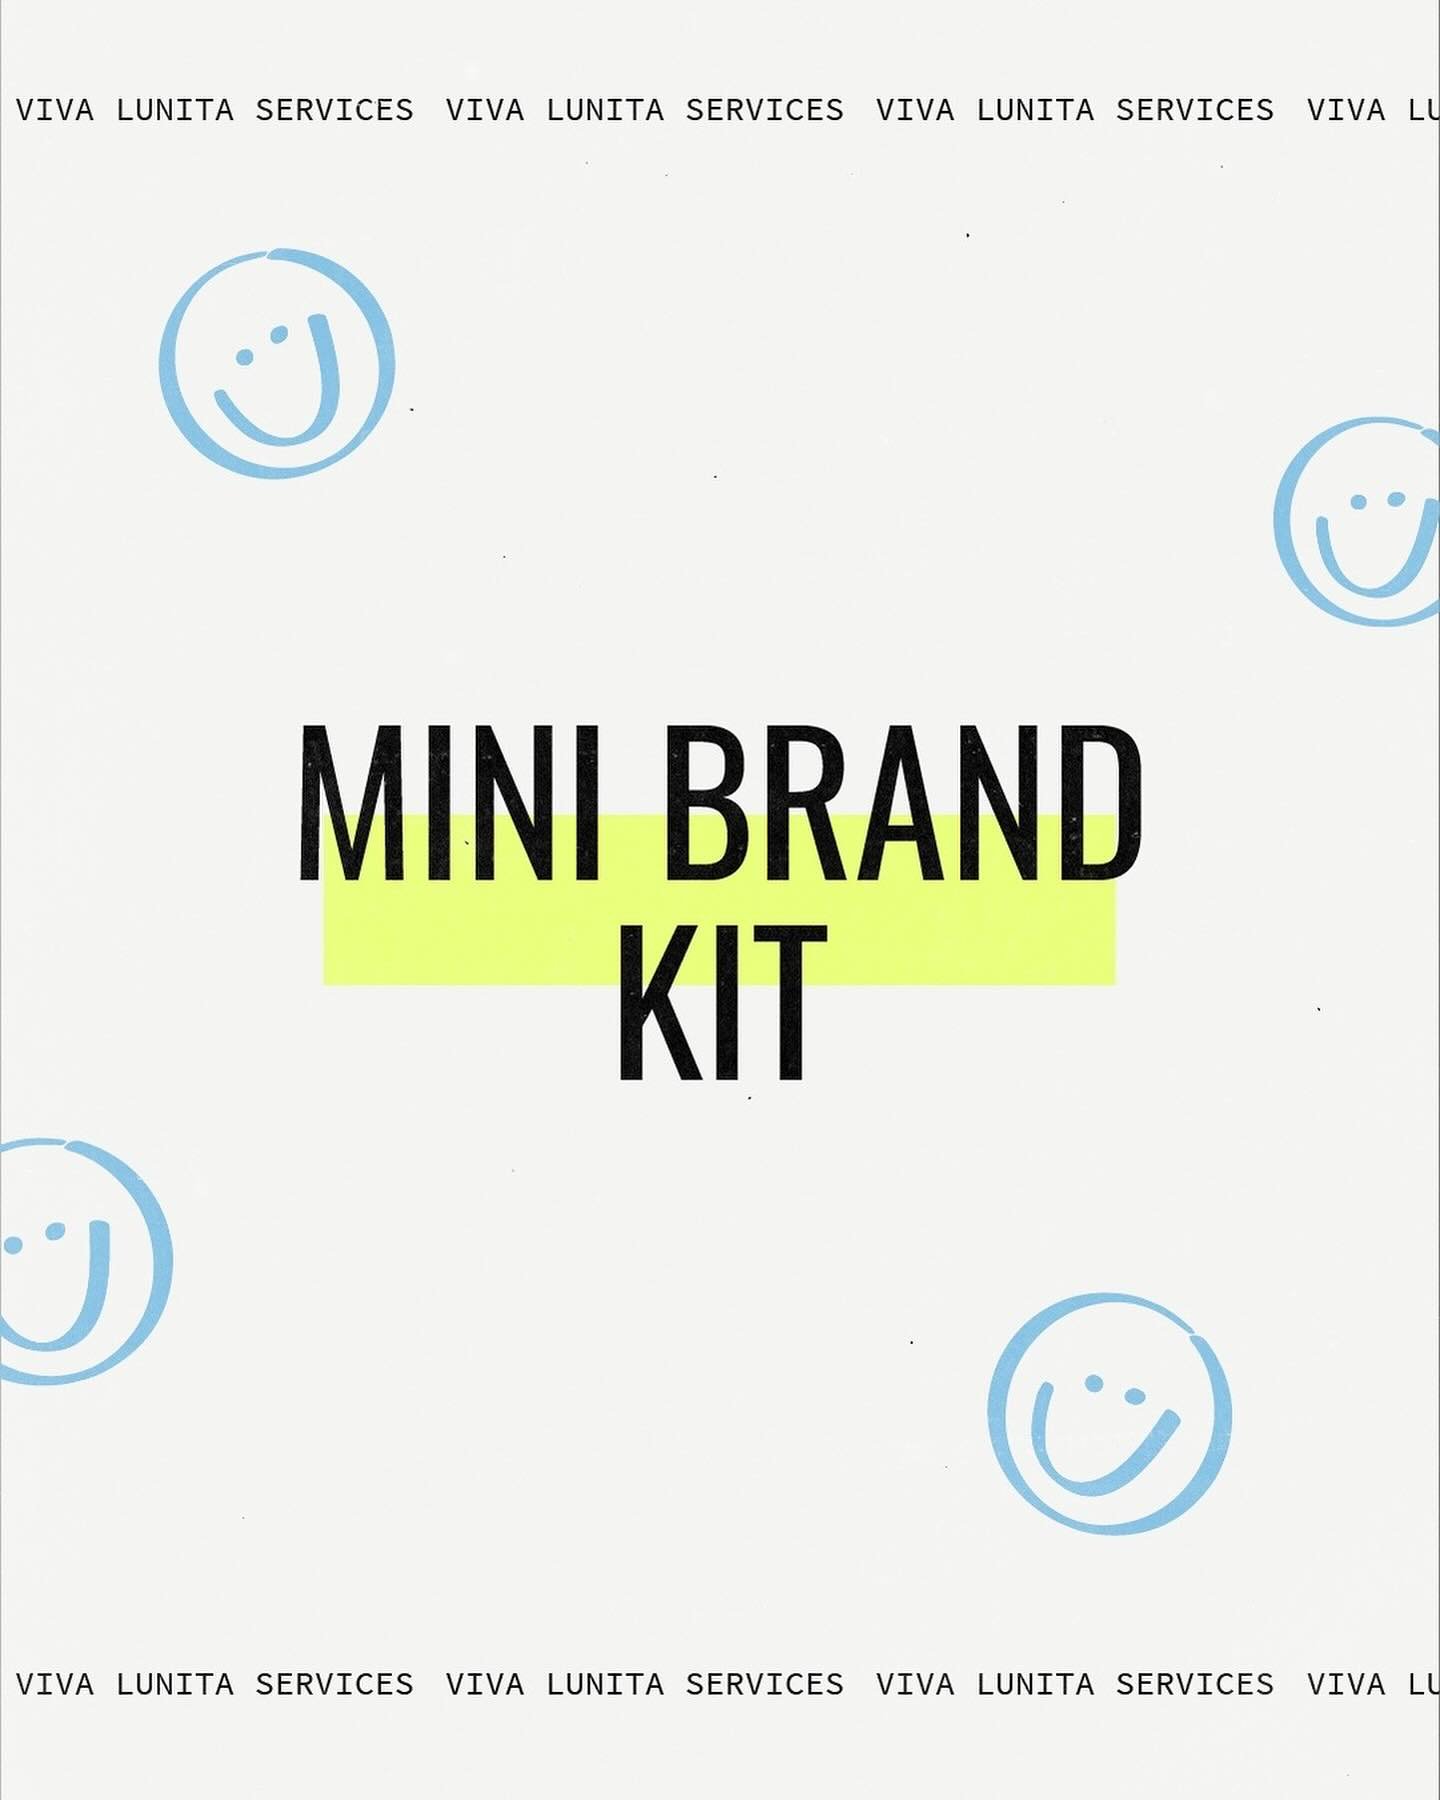 Hola friends! 🩷 Following up on yesterday&rsquo;s reel, I wanted to dive a bit deeper into my Mini Brand Kits👀. So here&rsquo;s a detailed rundown of what they are, what&rsquo;s included, the process, and who can benefit from them.
⠀⠀⠀⠀⠀⠀⠀⠀⠀
My goa